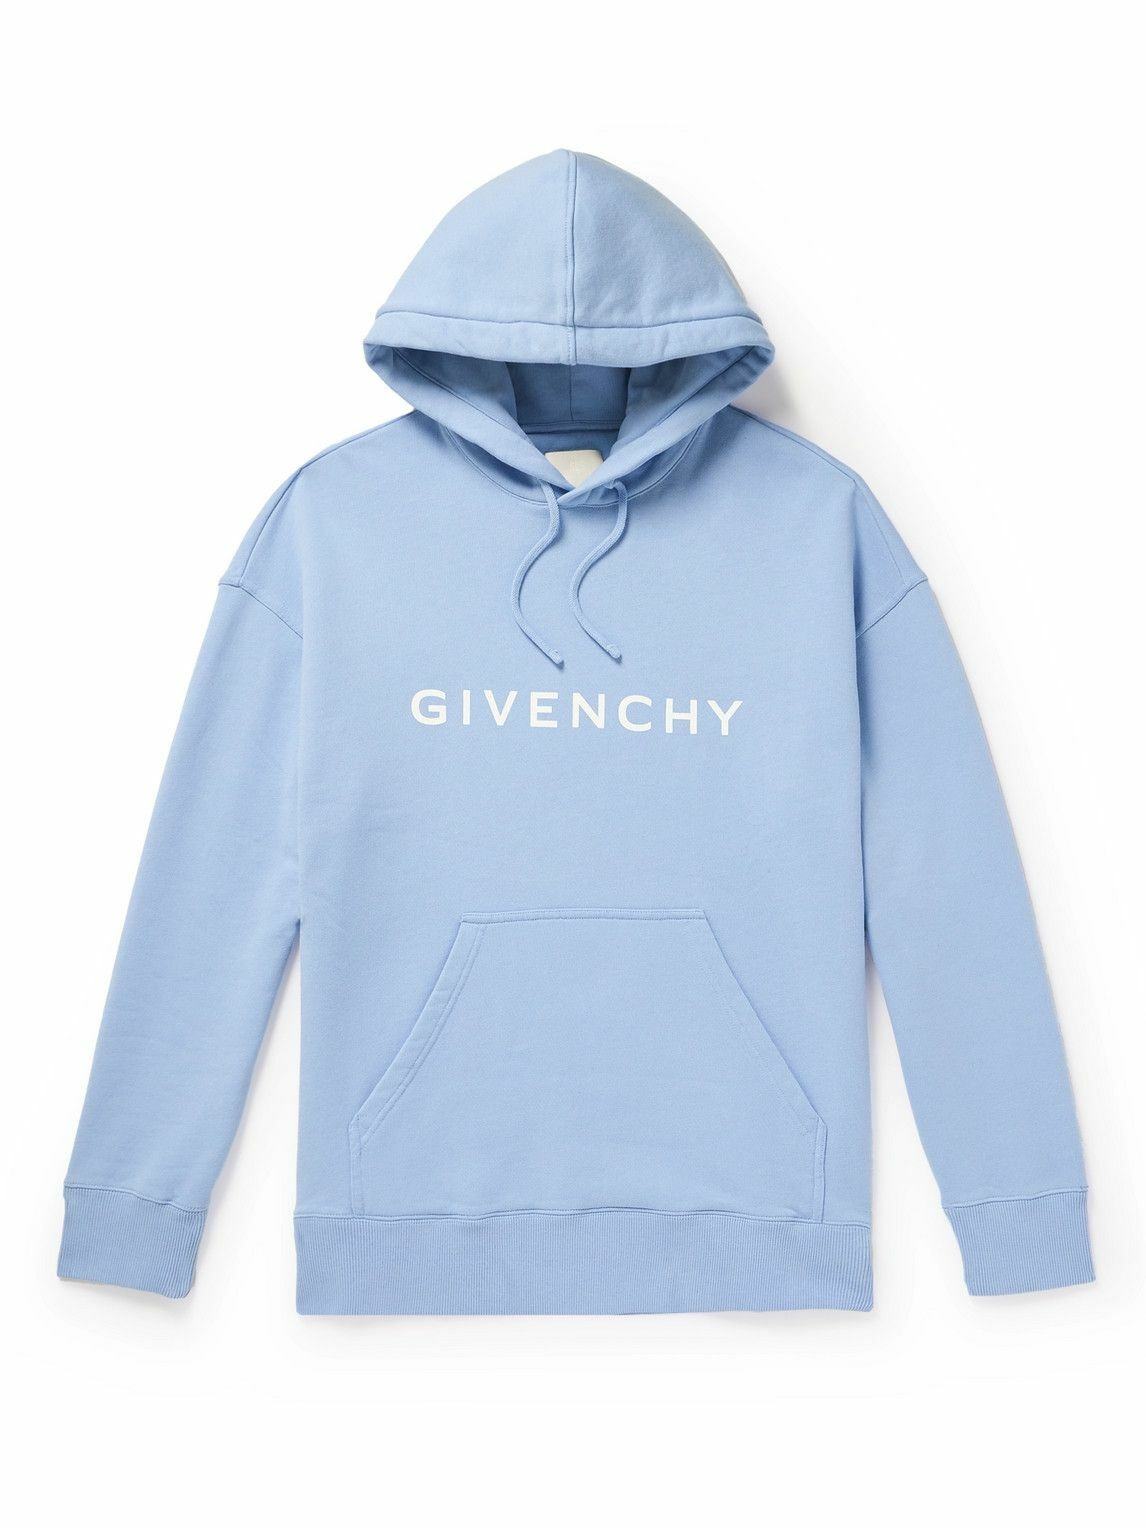 Givenchy - Archetype Logo-Print Cotton-Jersey Hoodie - Blue Givenchy